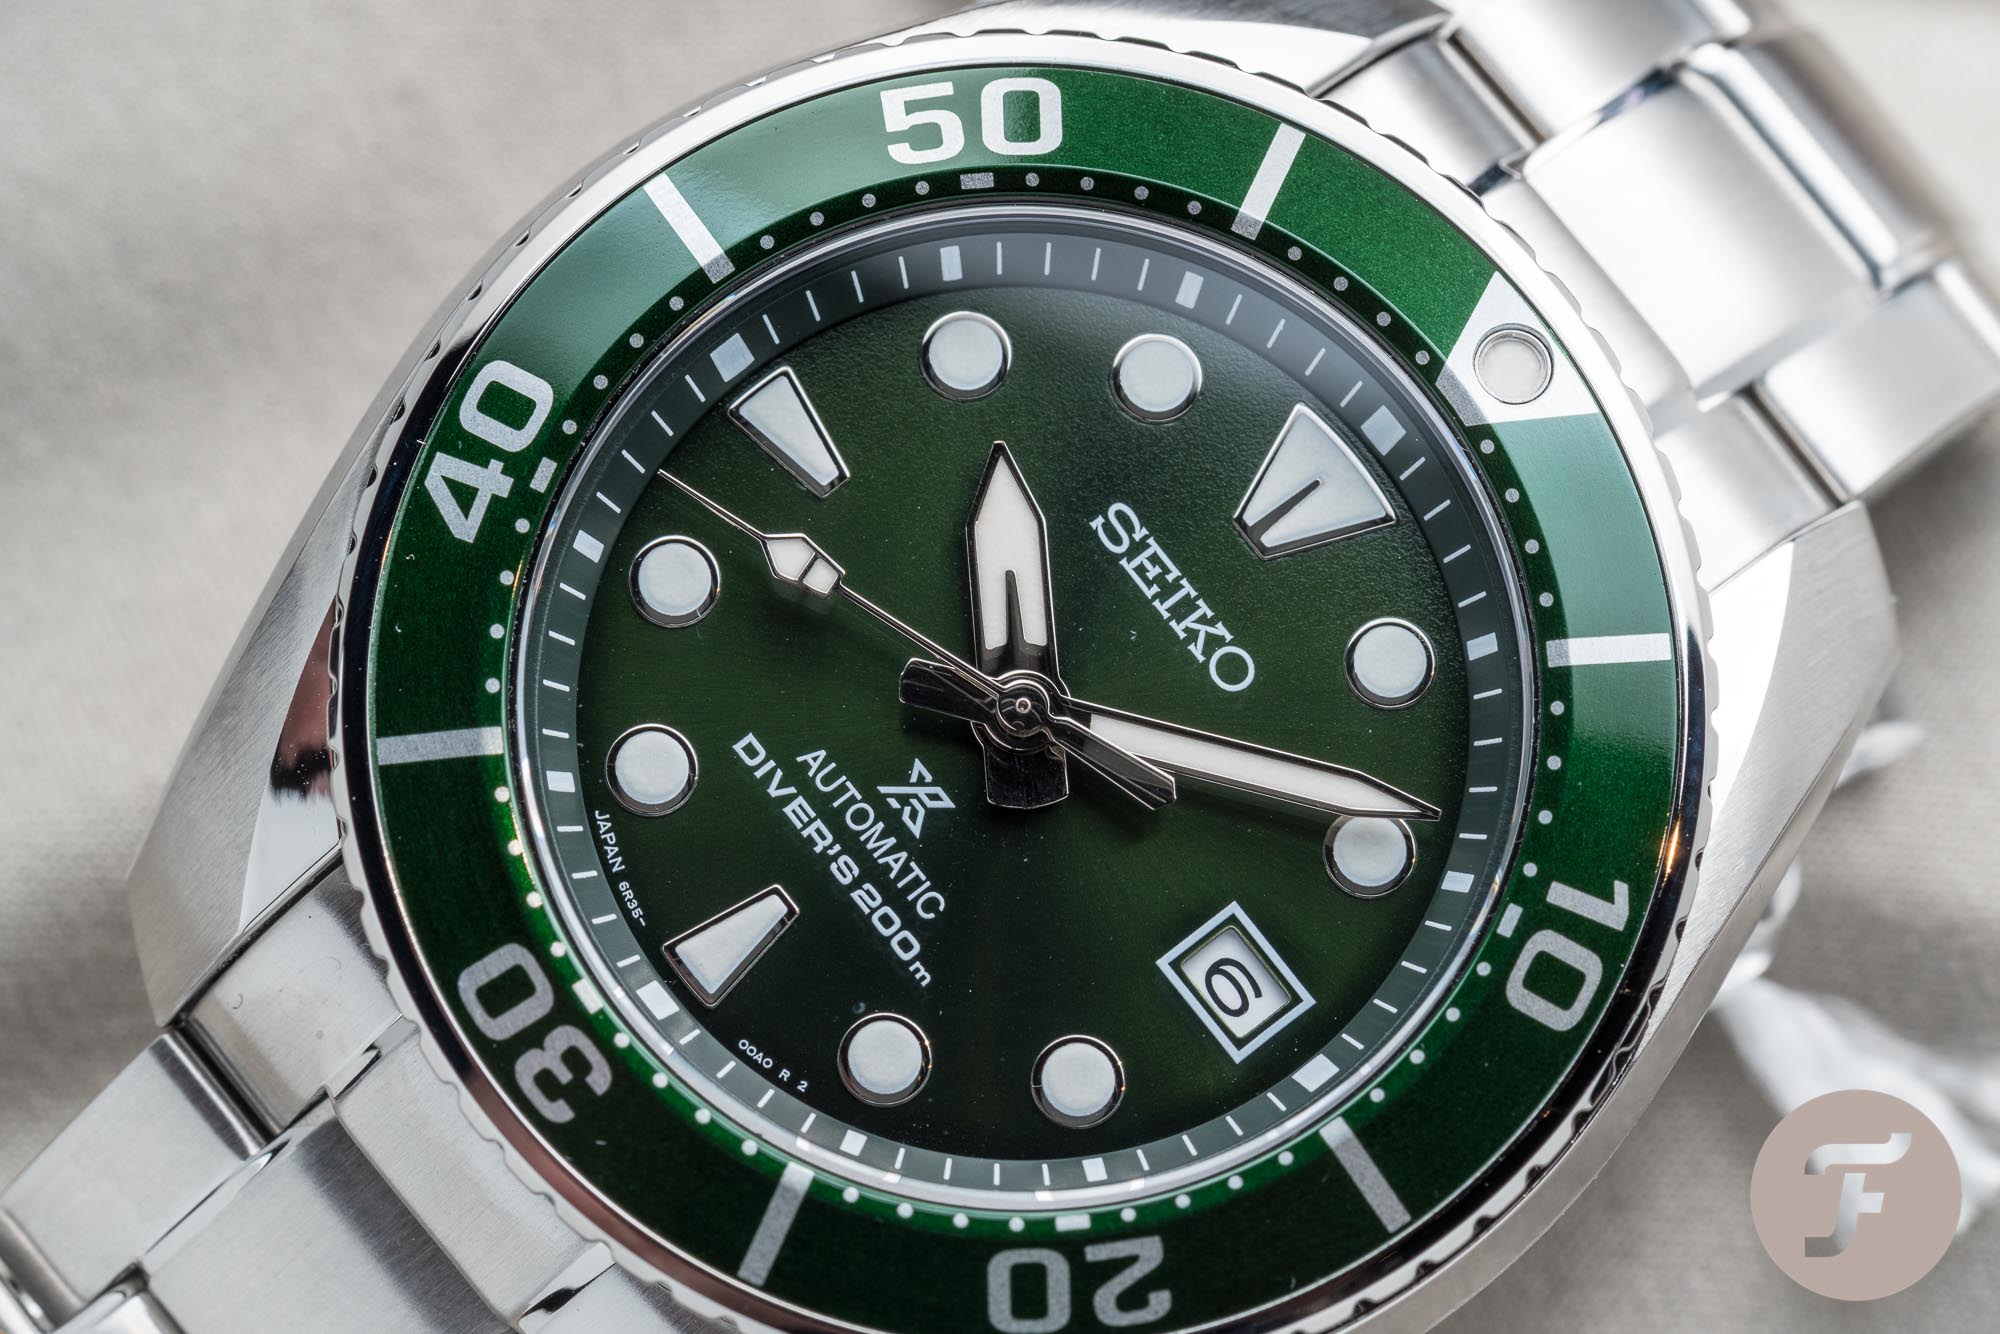 Seiko Prospex ”Sumo” SPB103j1 Review & Complete Guide - Millenary Watches